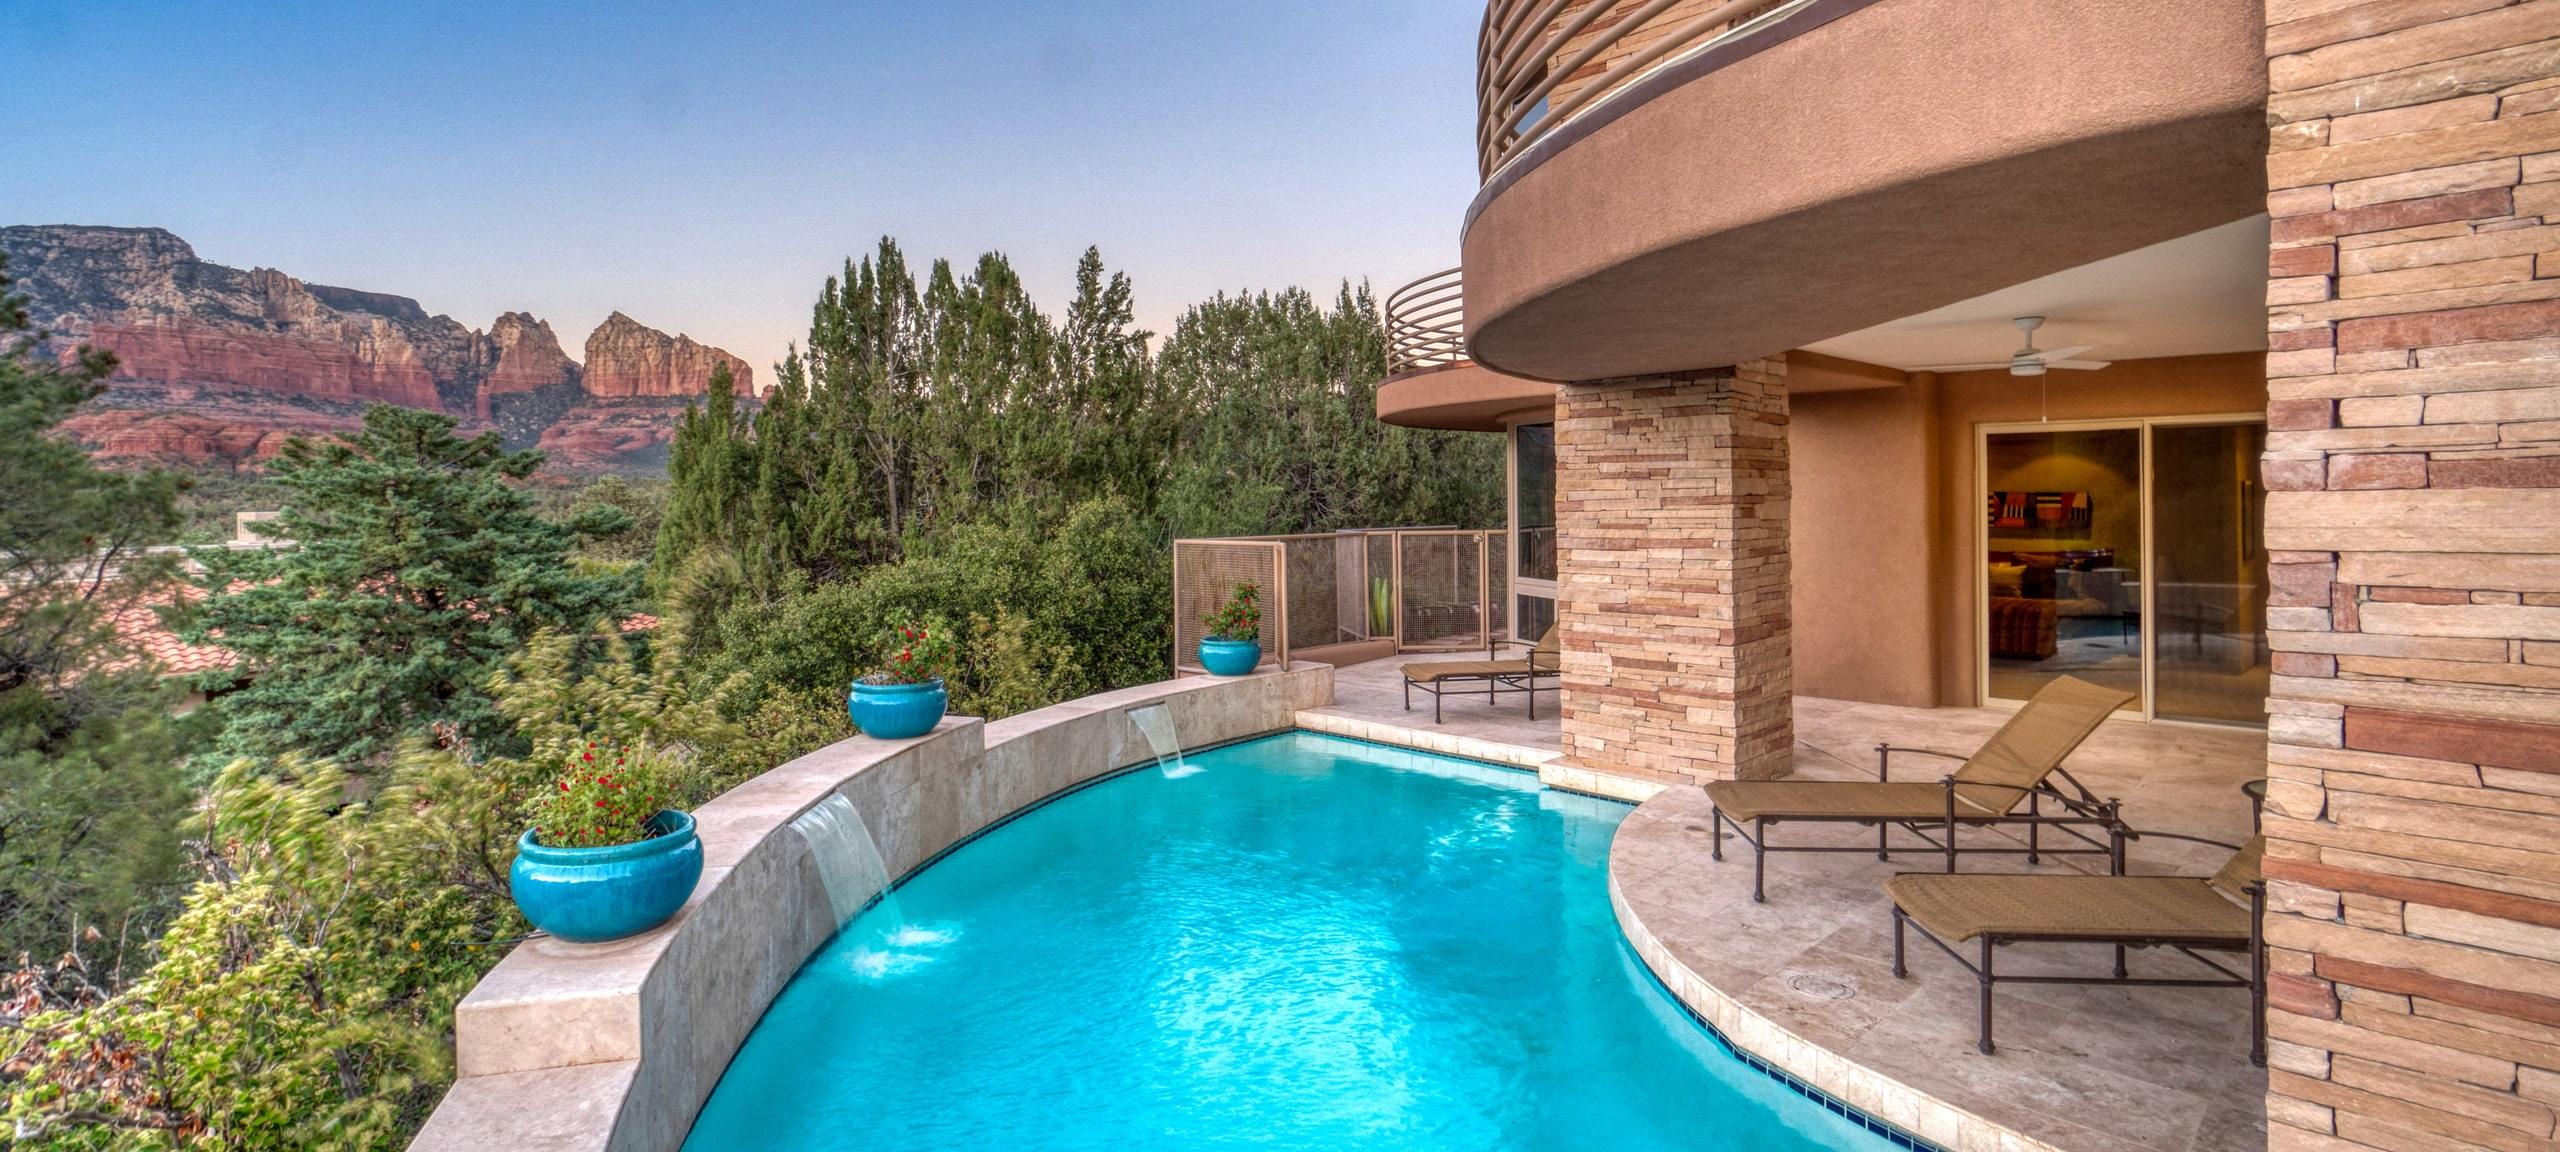 Backyard pool in a luxury St. George, Southern Utah home with gorgeous mountain views